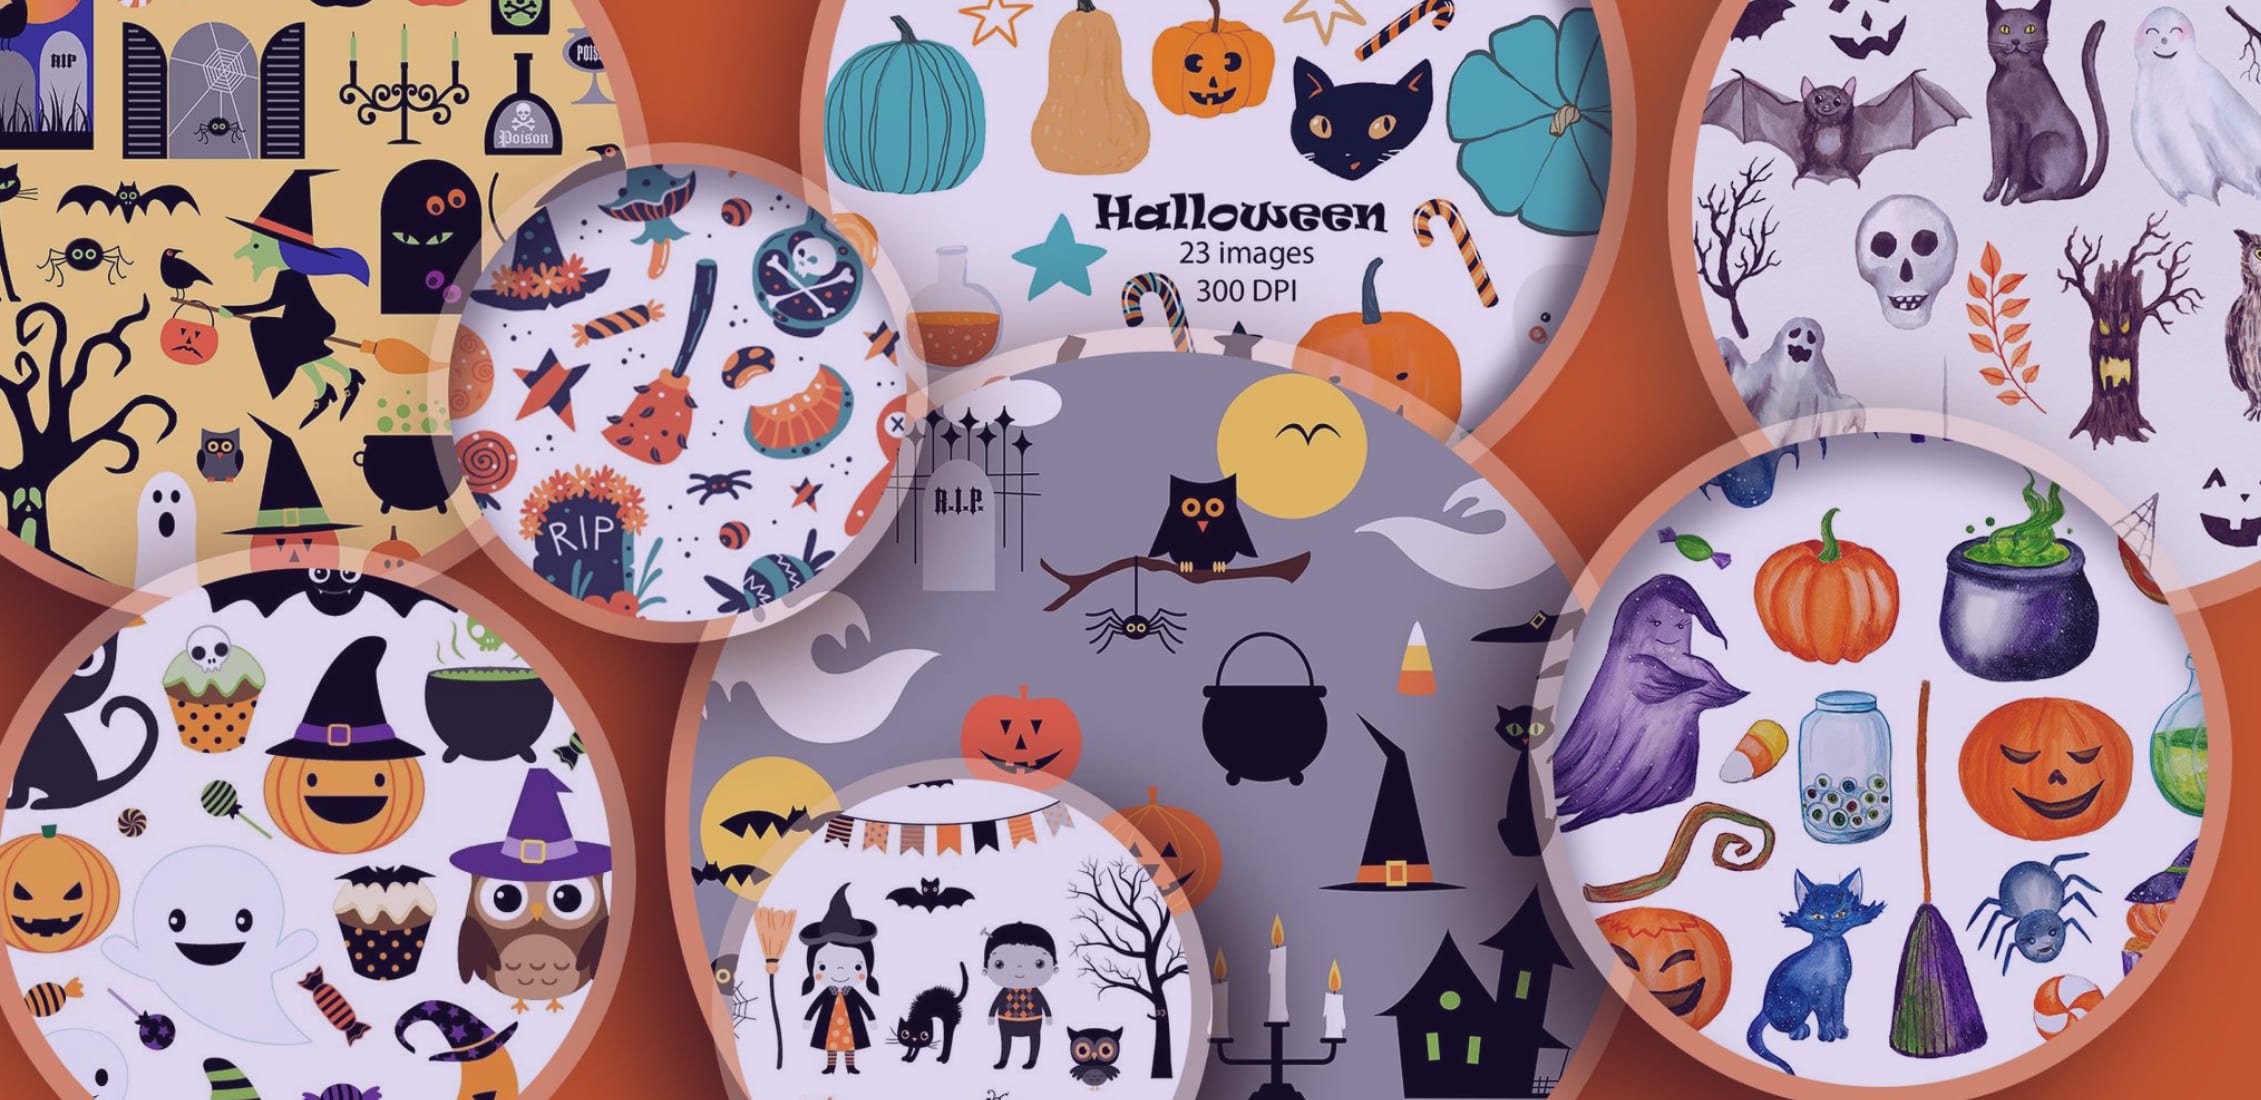 Examples of Halloween clipart.